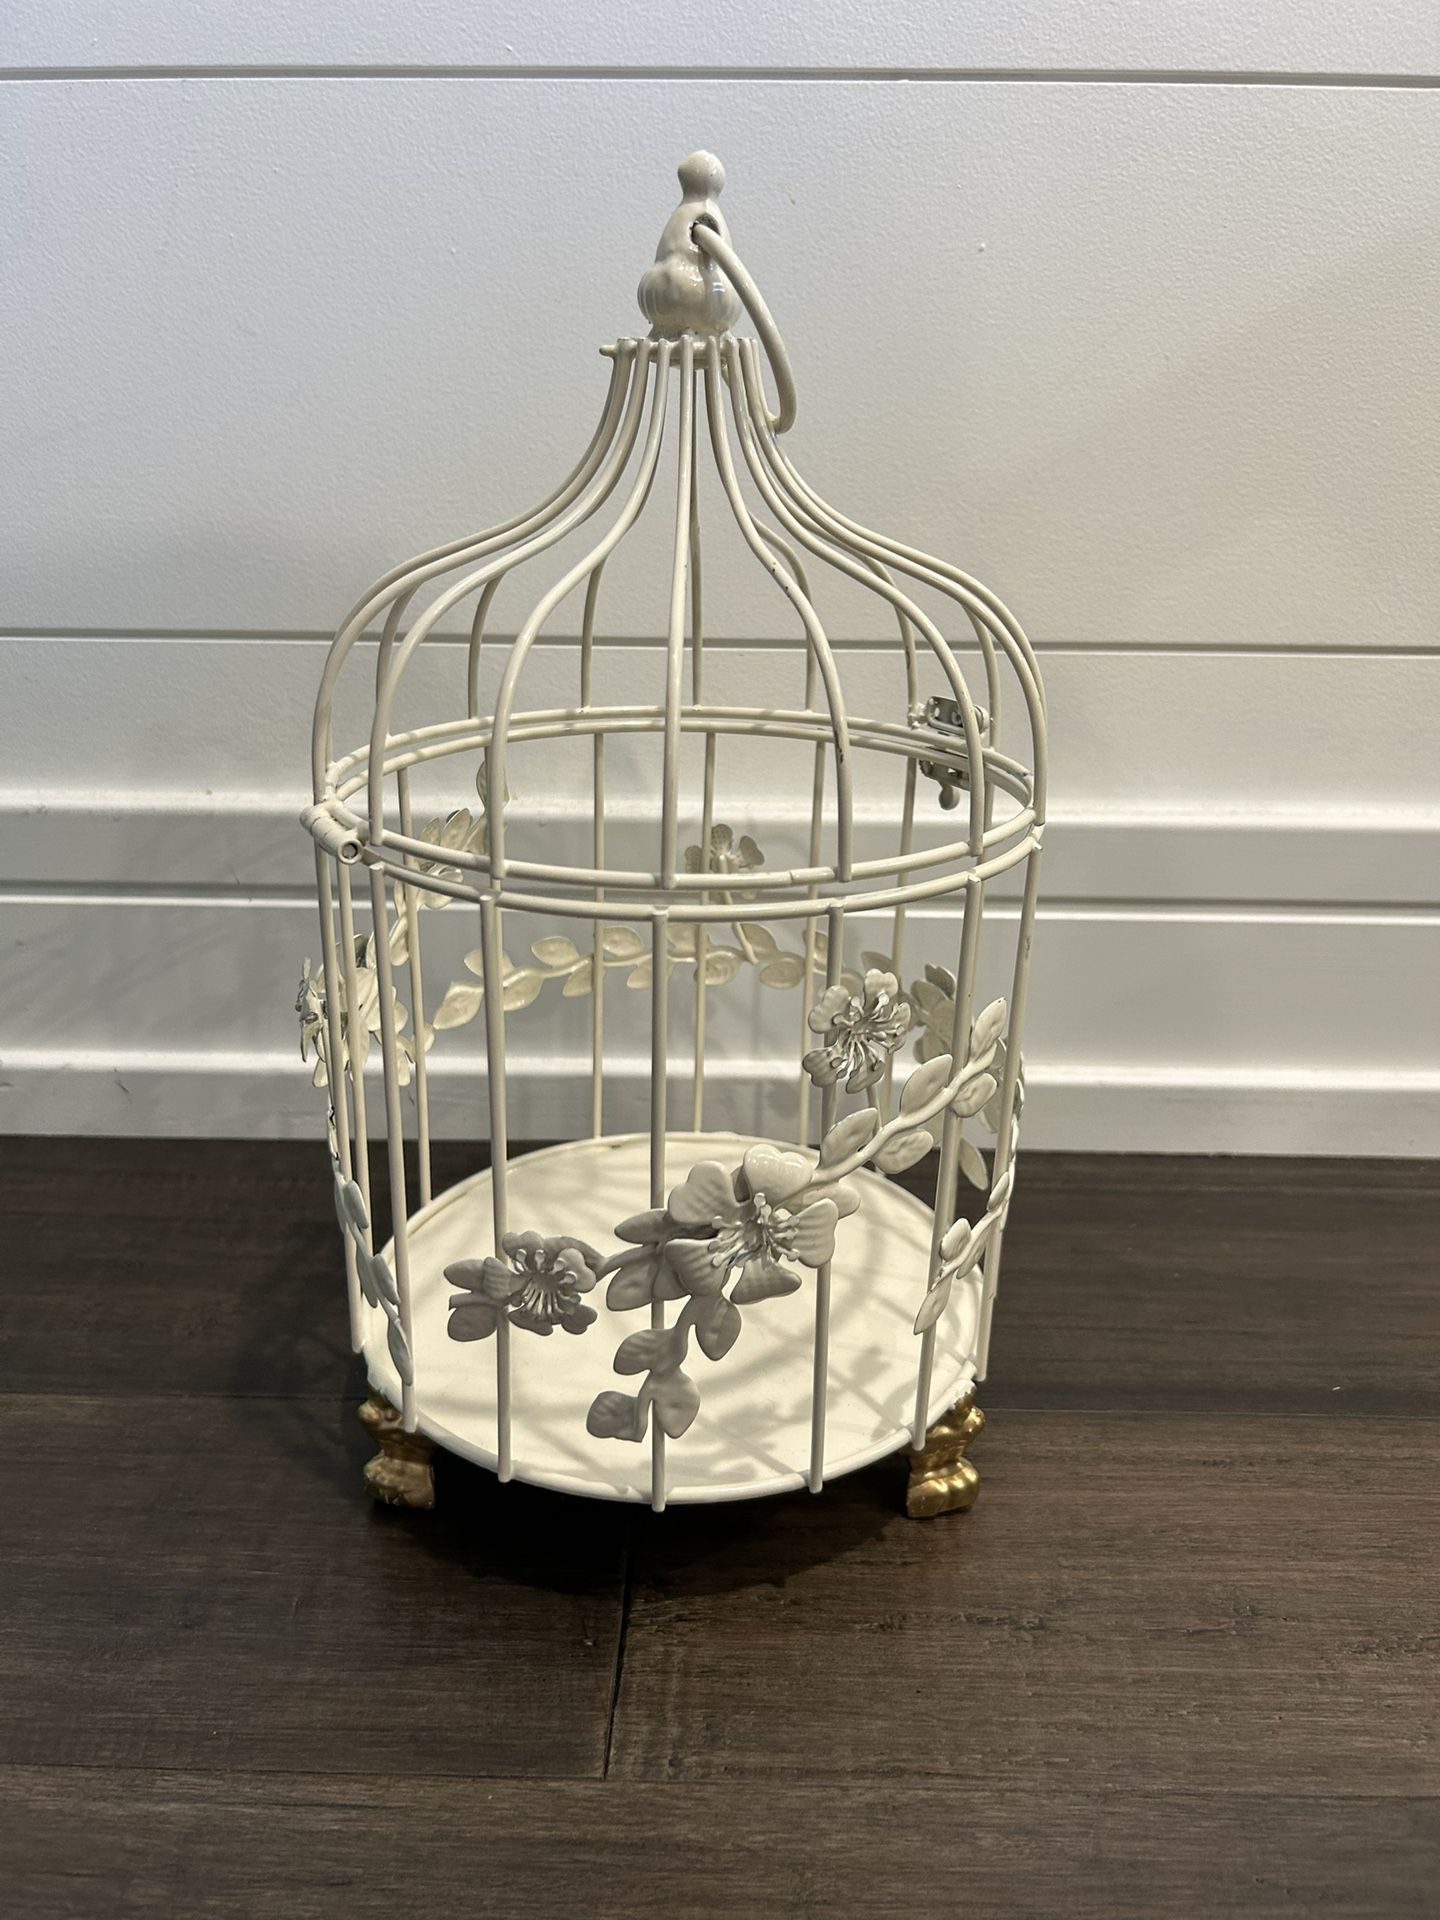 beautiful off white and gold cage - decor